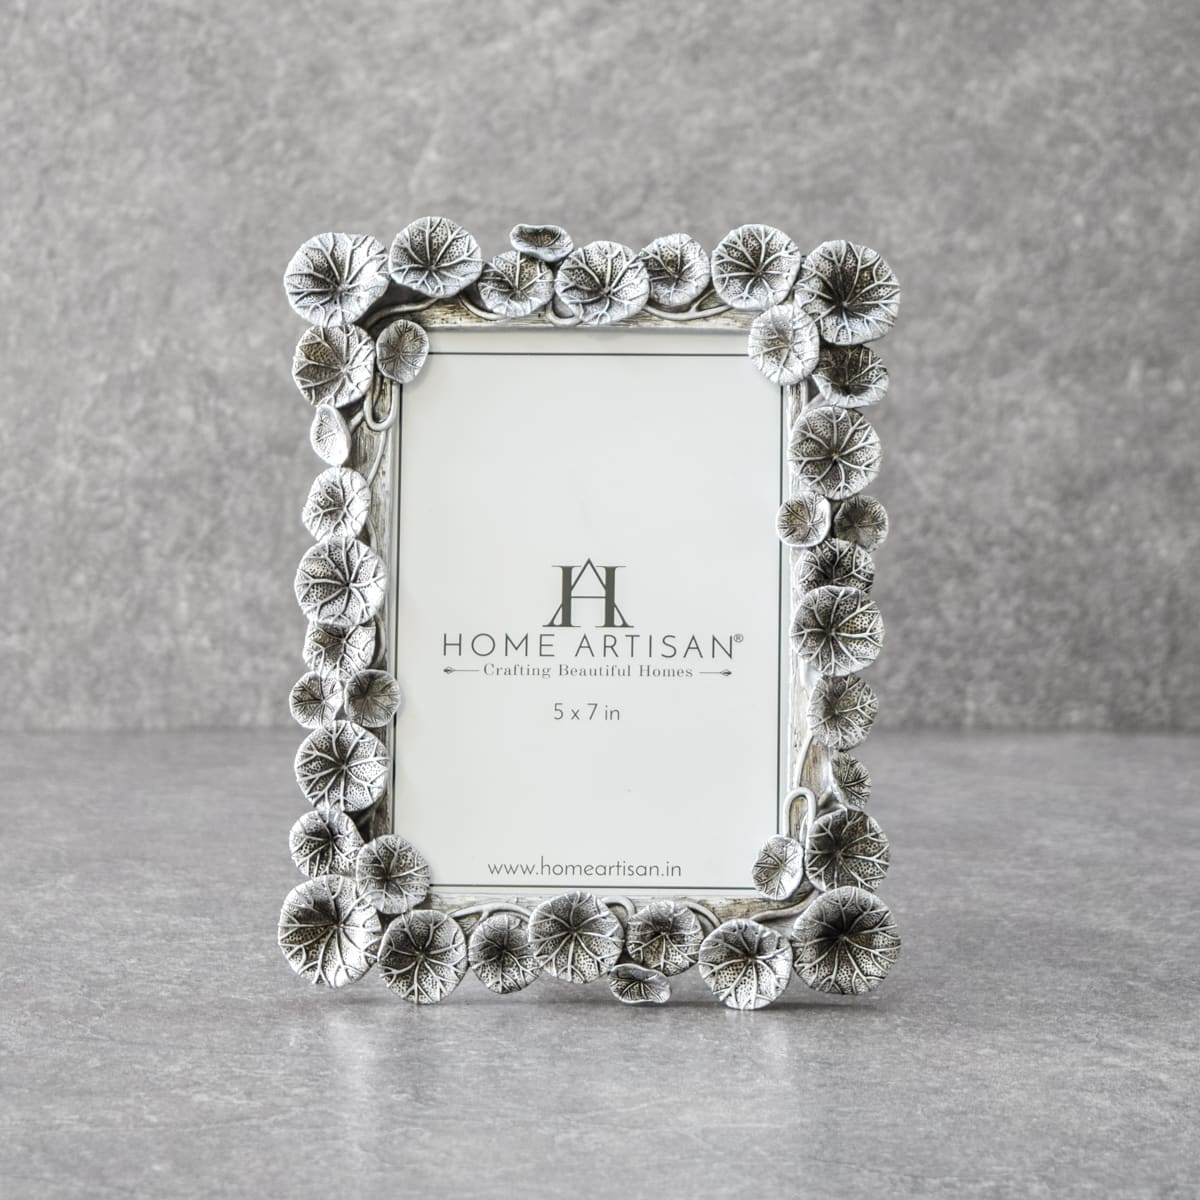 SL Illuminated Scarf Display Frame by LuxeDisplay Silver Frame / 70 cm/ 28 in